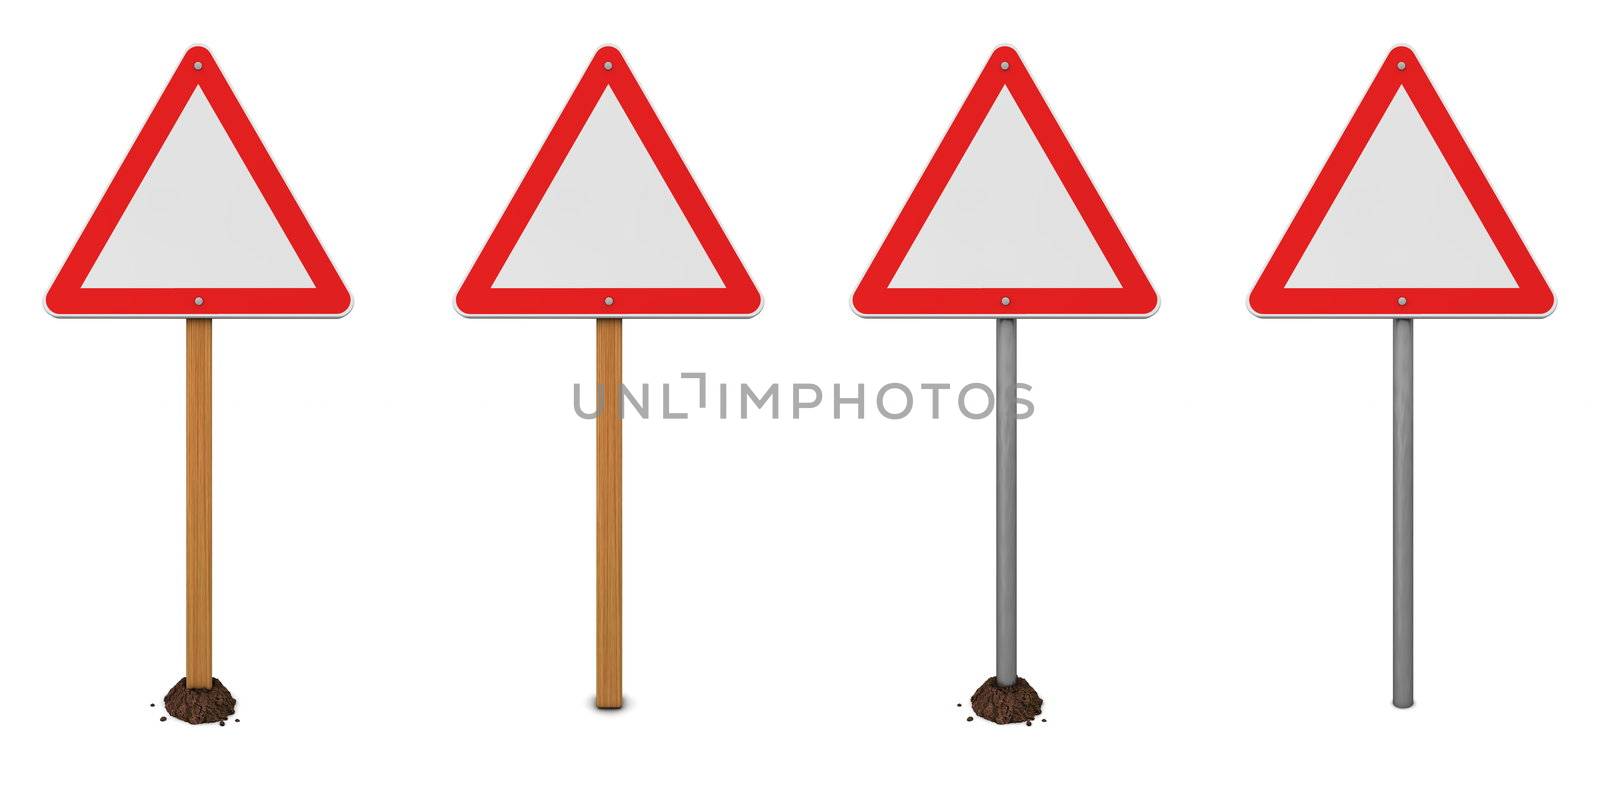 Triangular Warning Sign Variations by PixBox